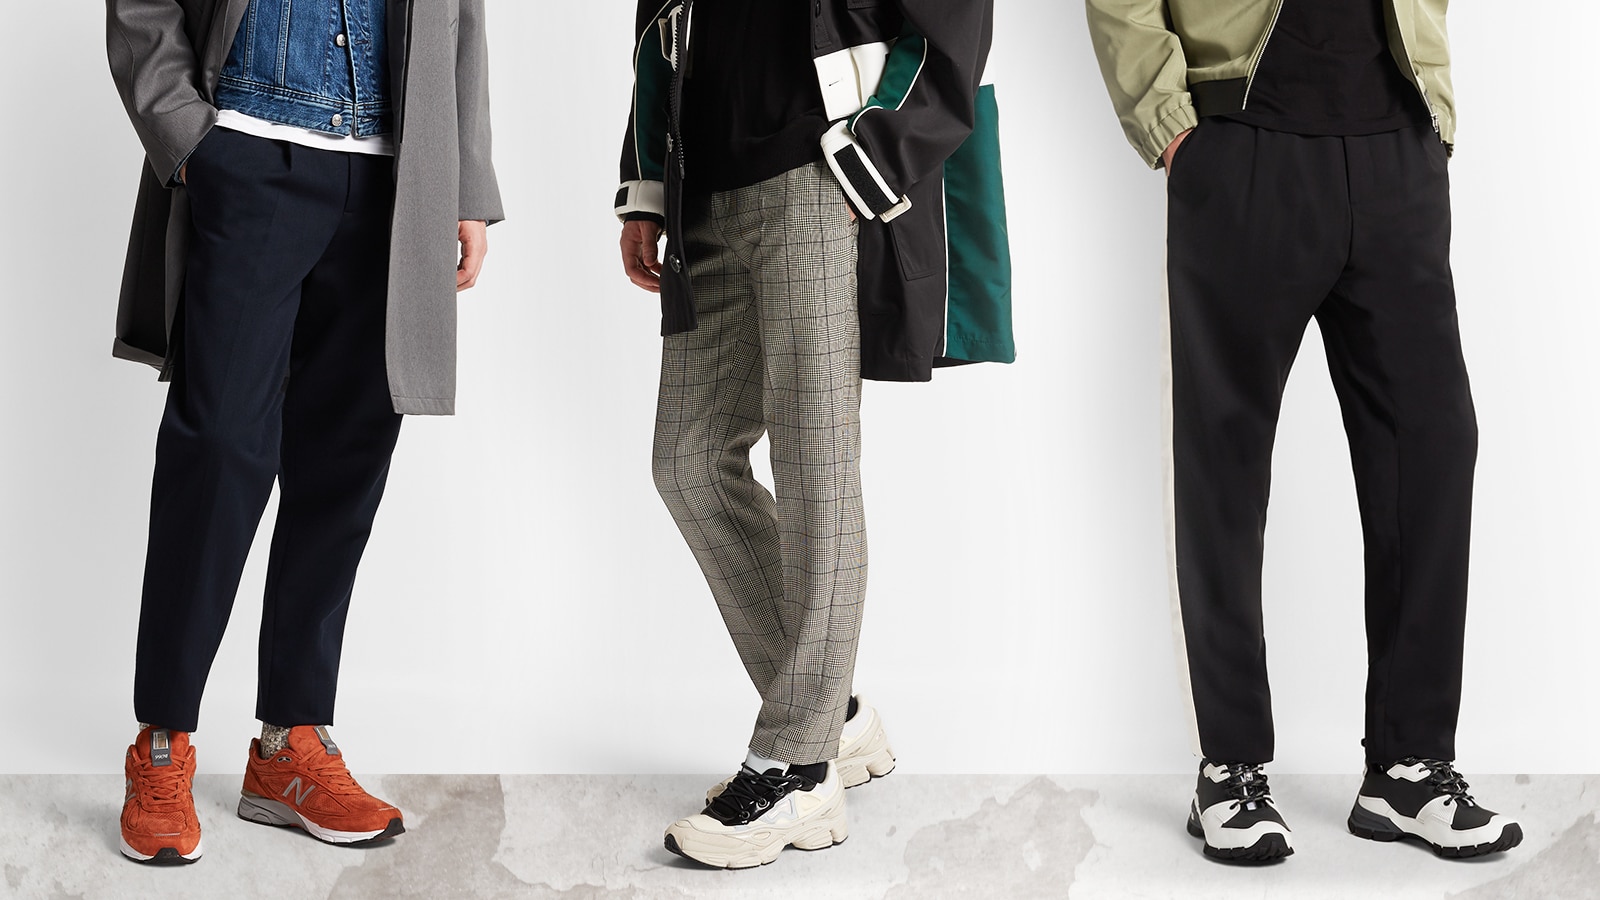 Three Ways To Wear: The “Ugly” Sneaker Trend | The Journal | MR PORTER